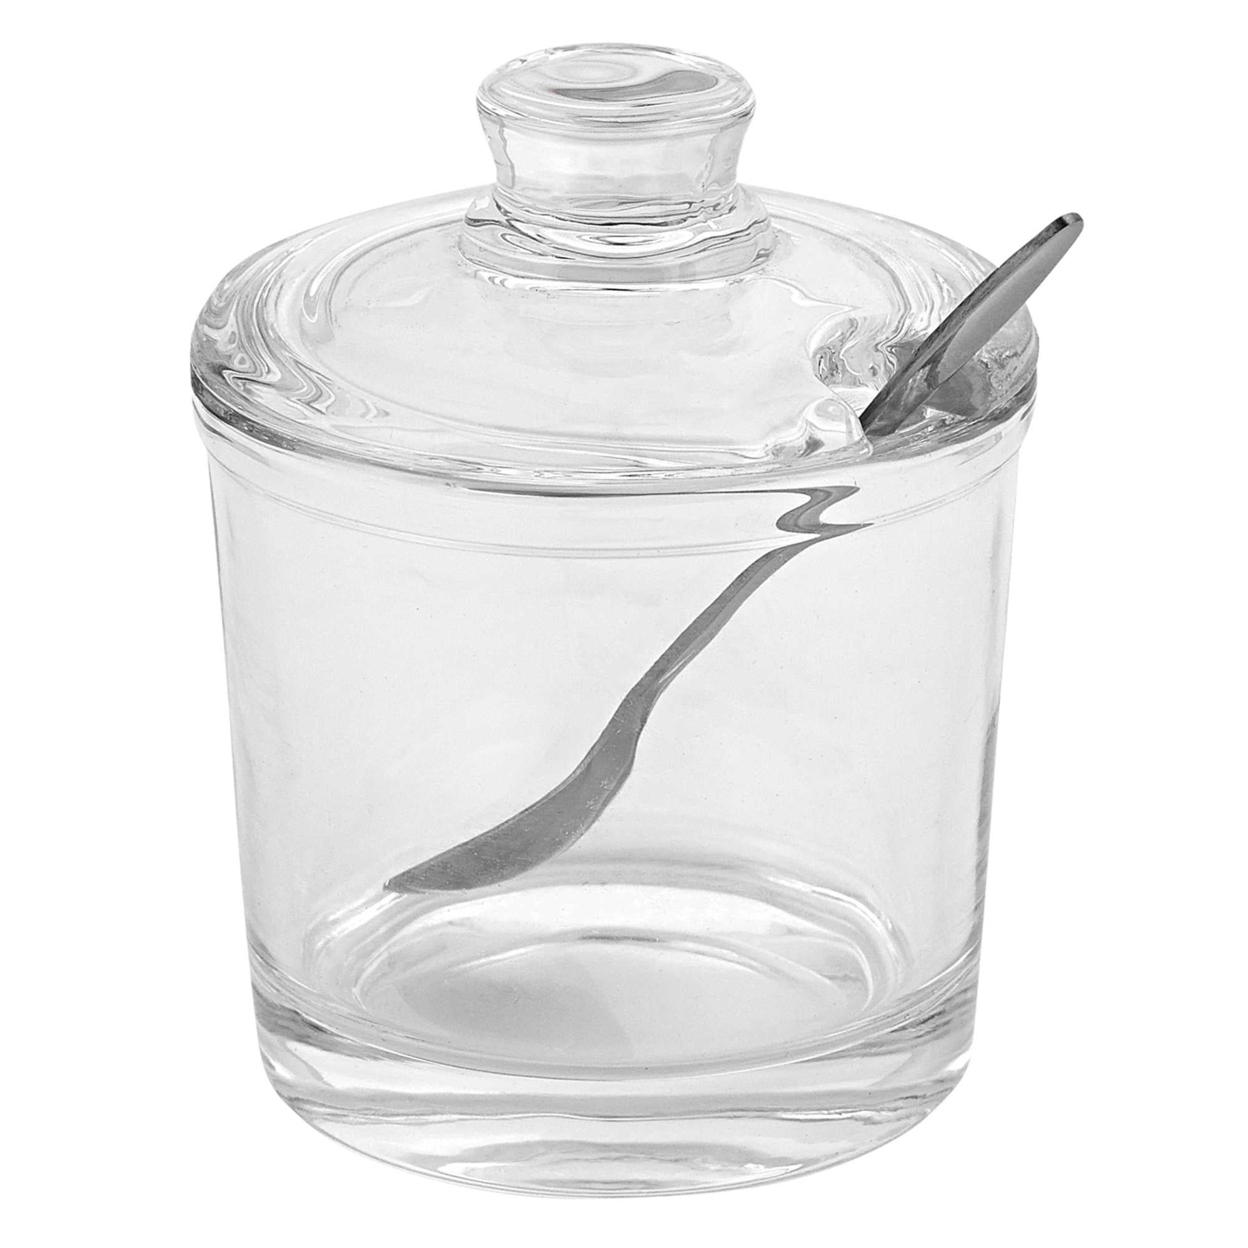 5" Mouth Blown Crystal Jam or Honey Jar with Stainless Spoon